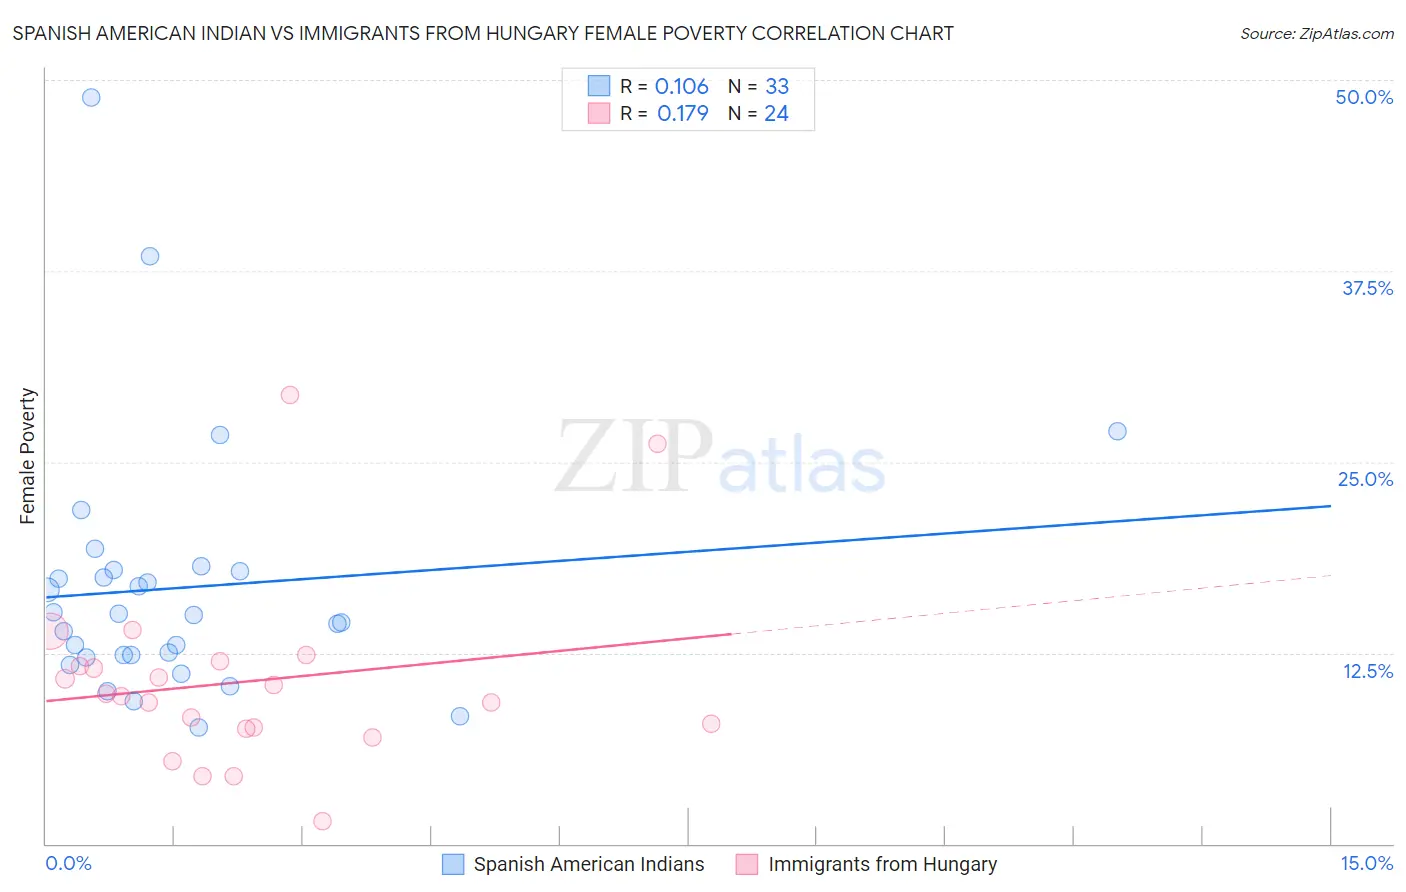 Spanish American Indian vs Immigrants from Hungary Female Poverty